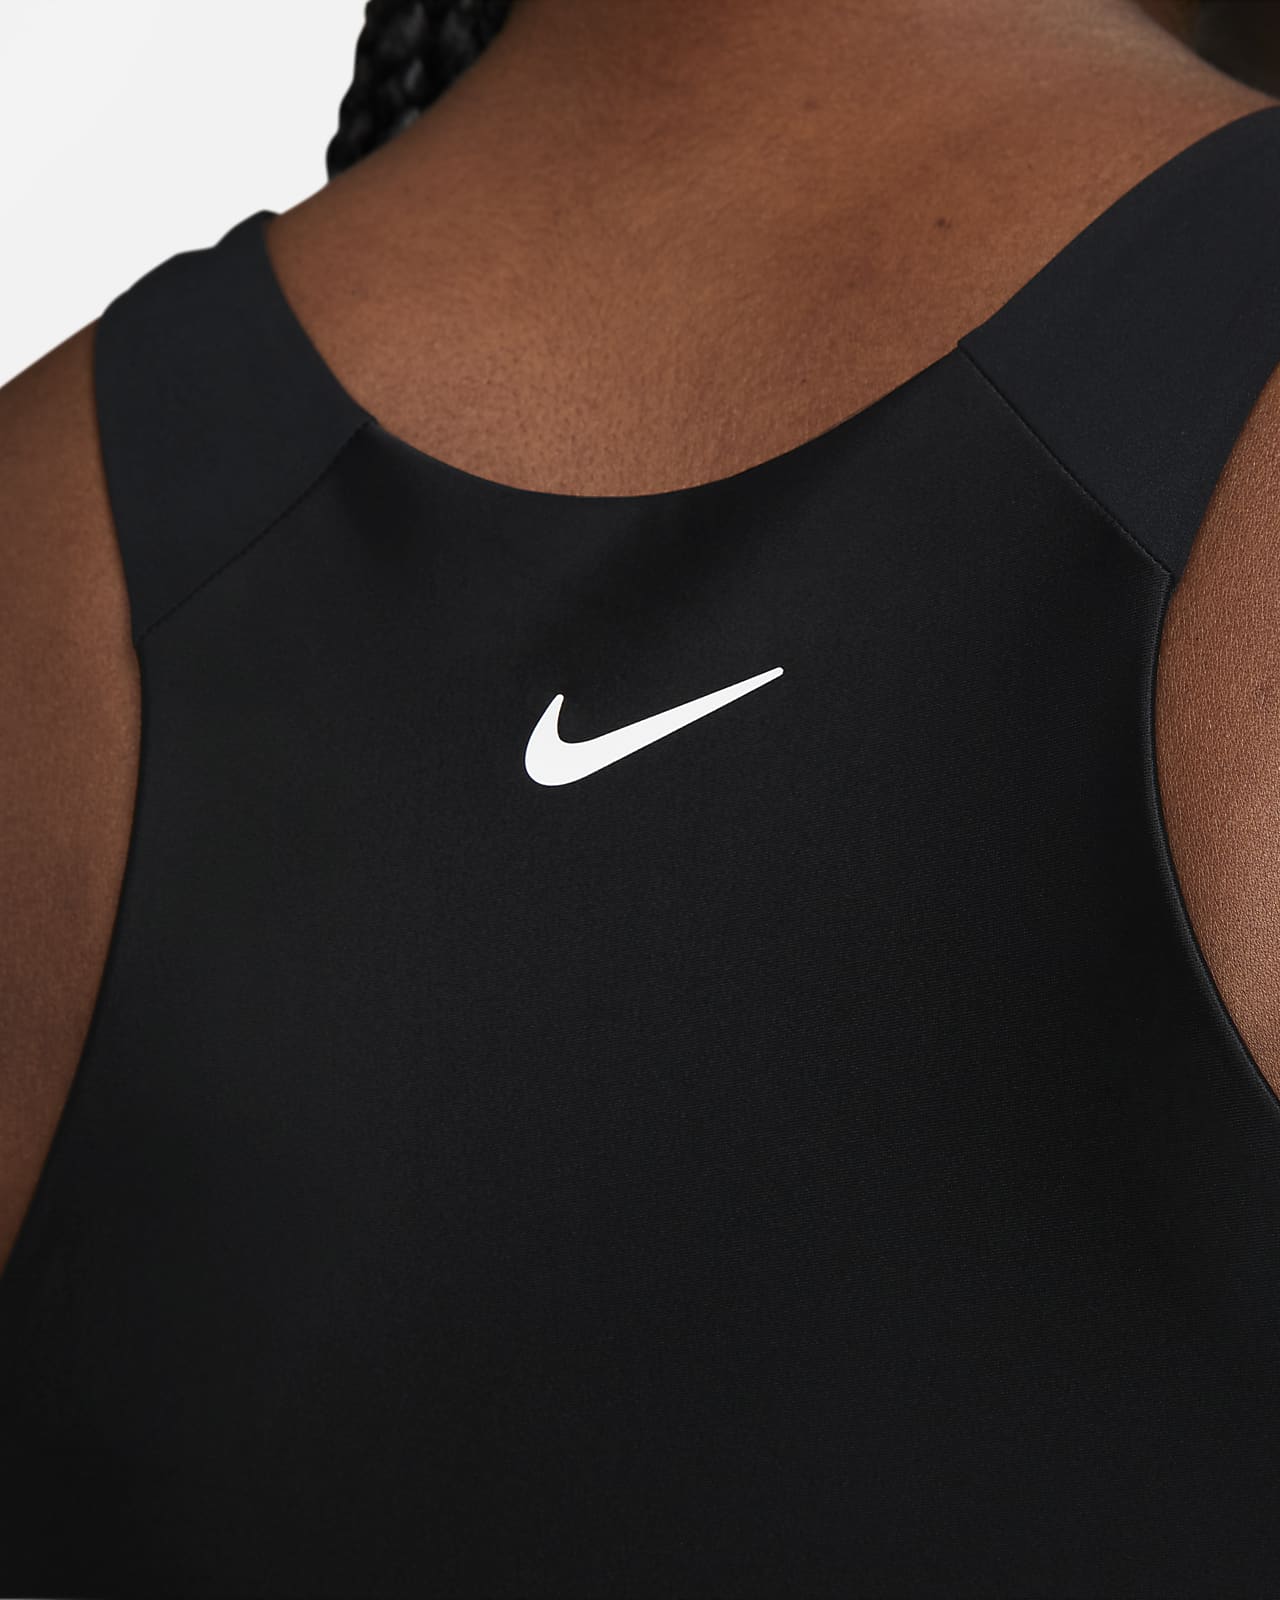 New Women's Nike Pro Black Cropped Training Tank Top Small MSRP $40 